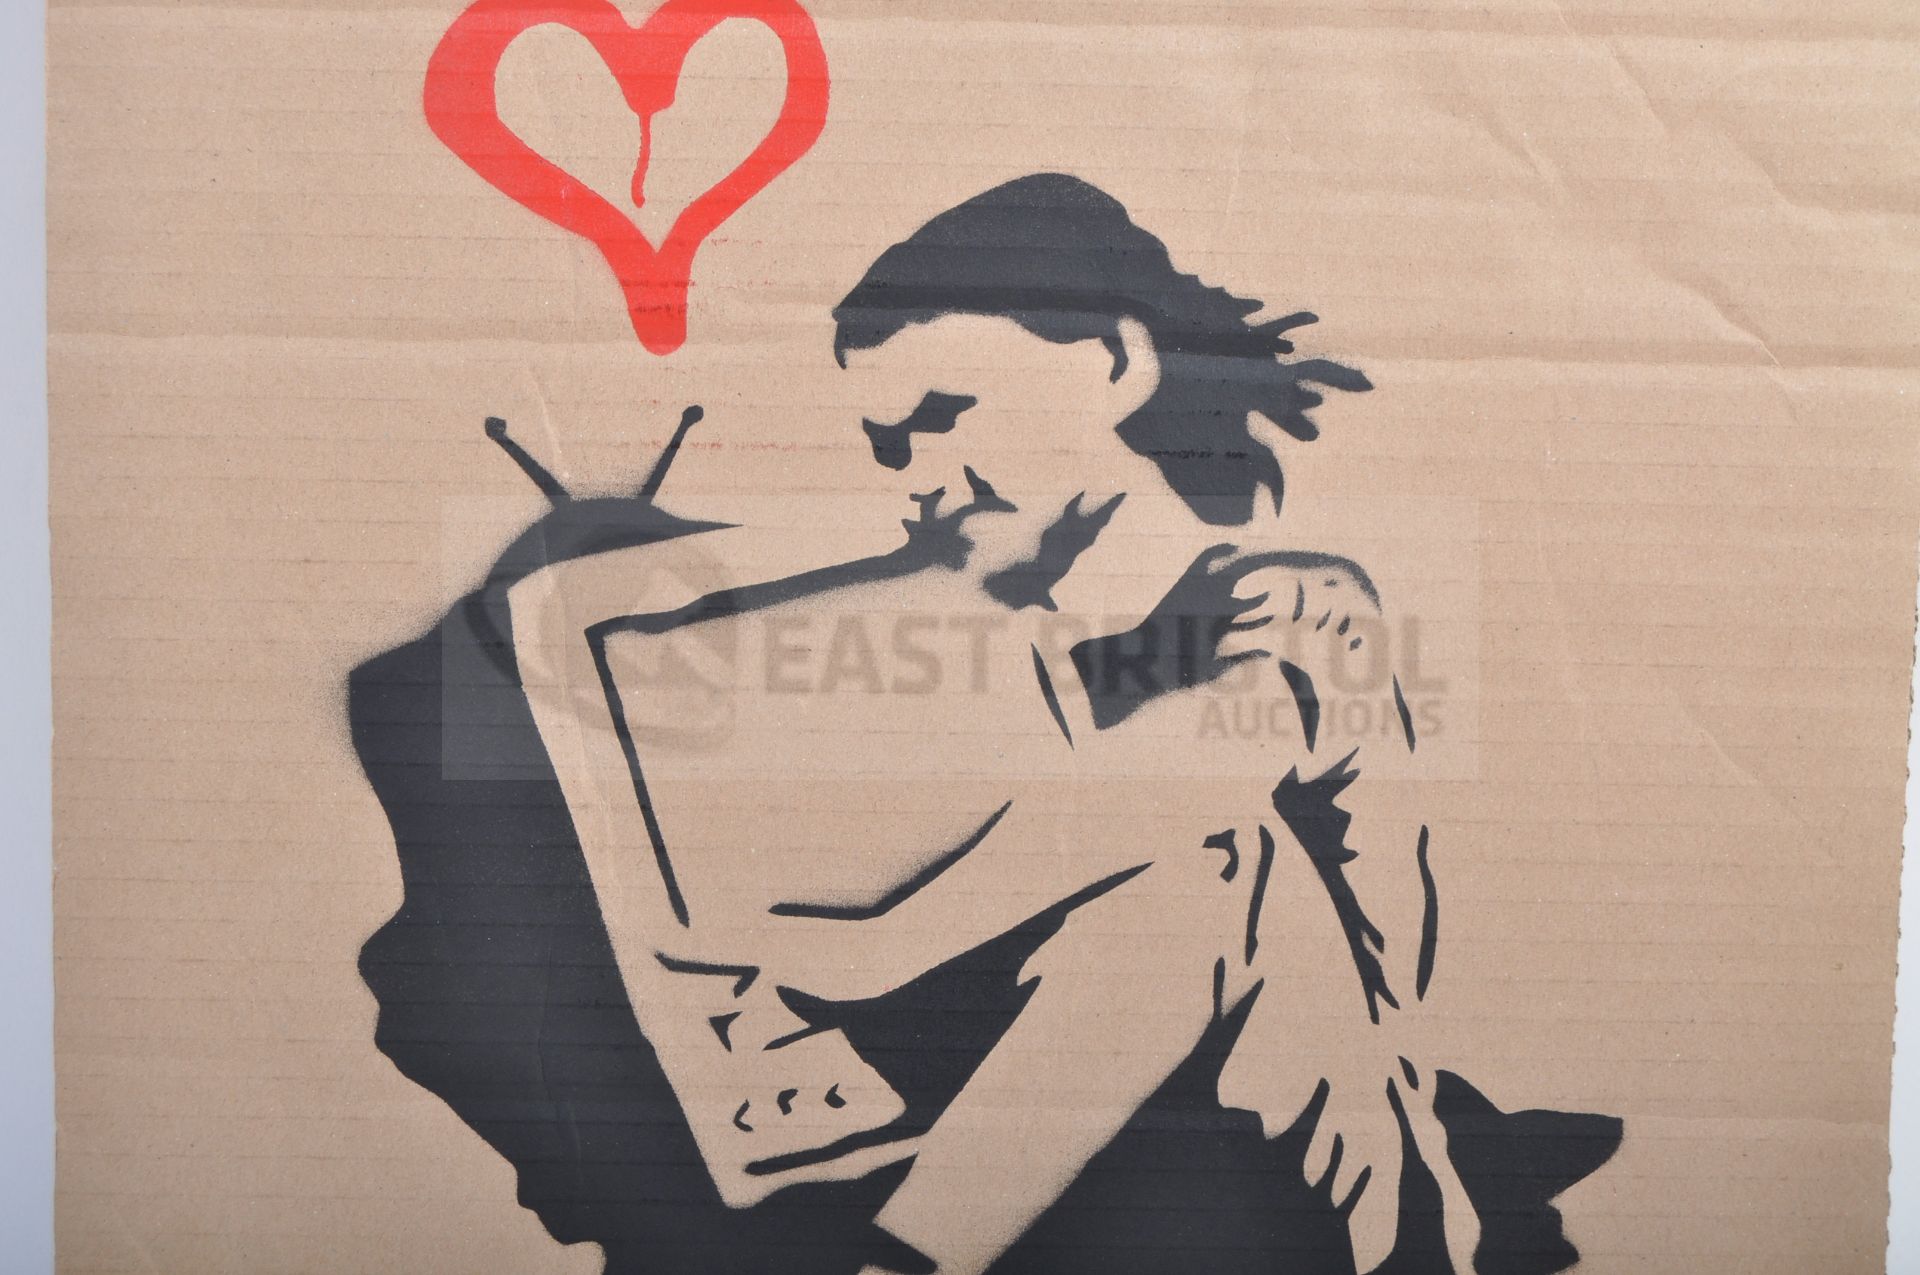 BANKSY - DISMALAND 2015 - LOVE YOUR TELEVISION - Image 2 of 4